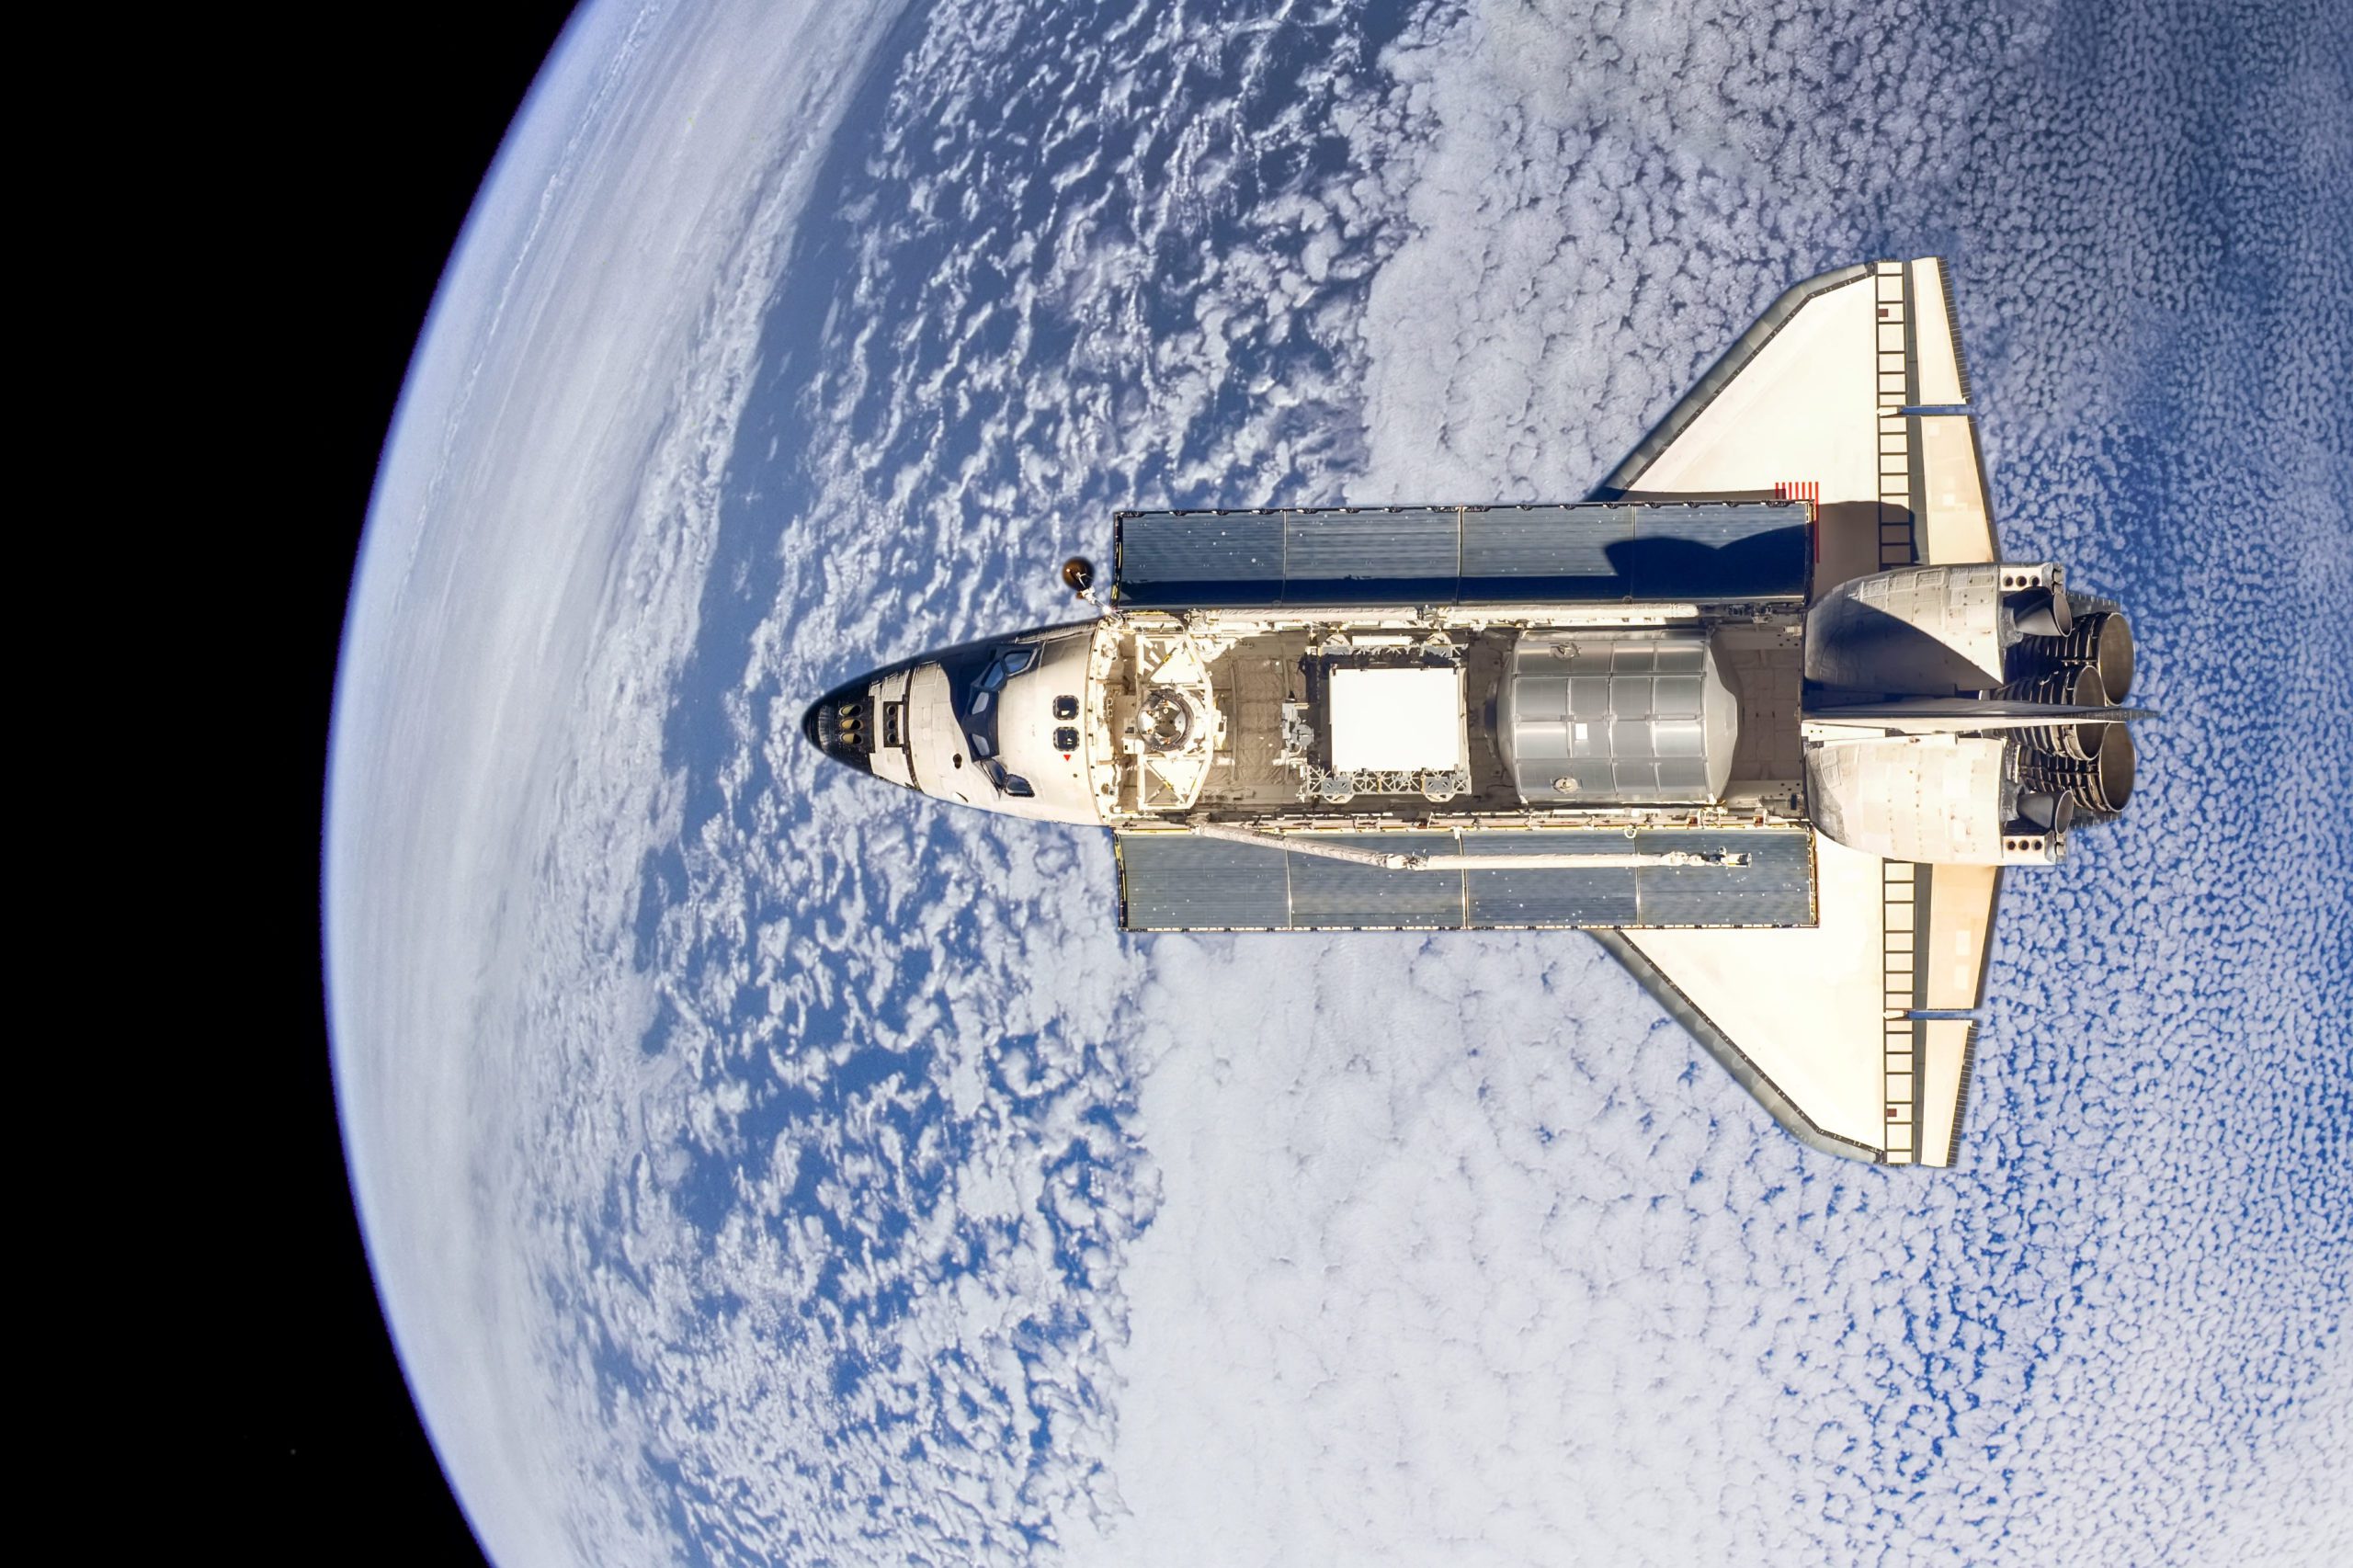 Aurora/AMP, in service for 18 years at NASA’s Kennedy Space Center, generated short- and long-term (10 year) schedules of ground-based activities that prepared and refurbished Space Shuttles before and after each flight. 